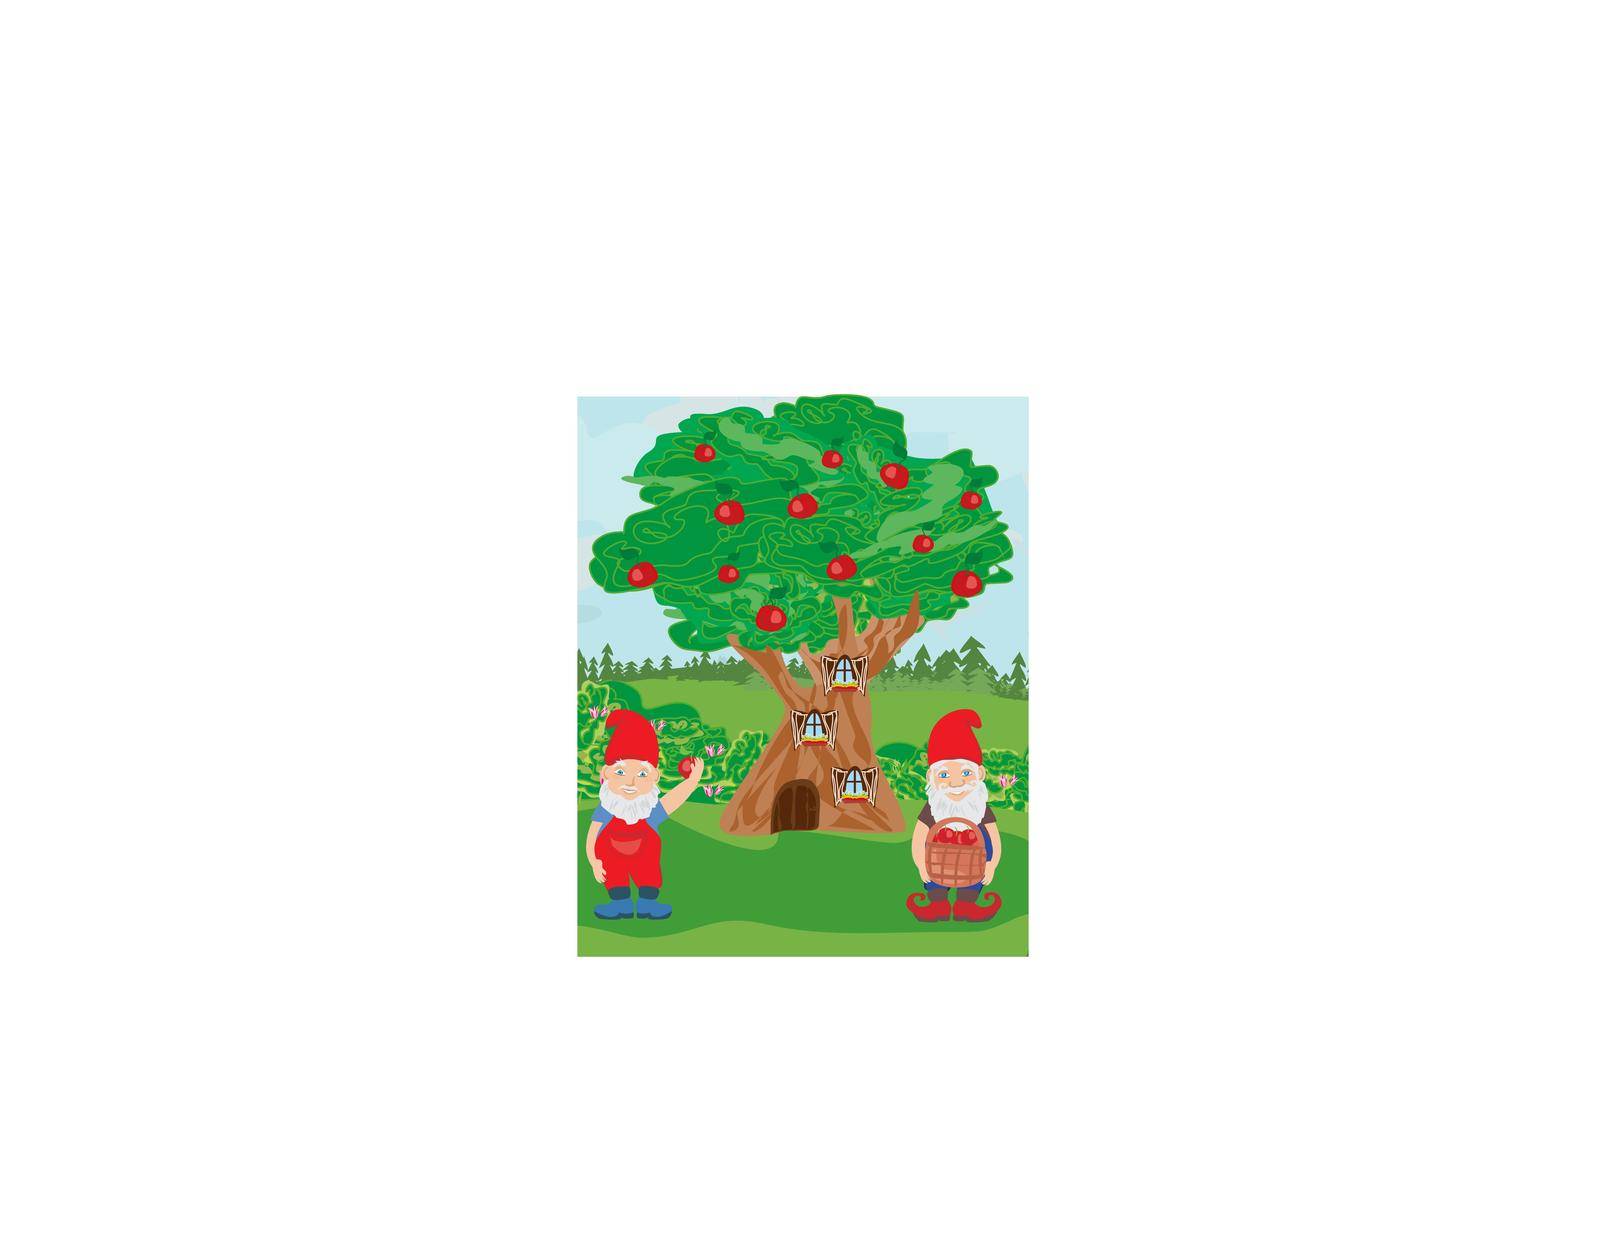 Fantasy tree house and two funny gnomes